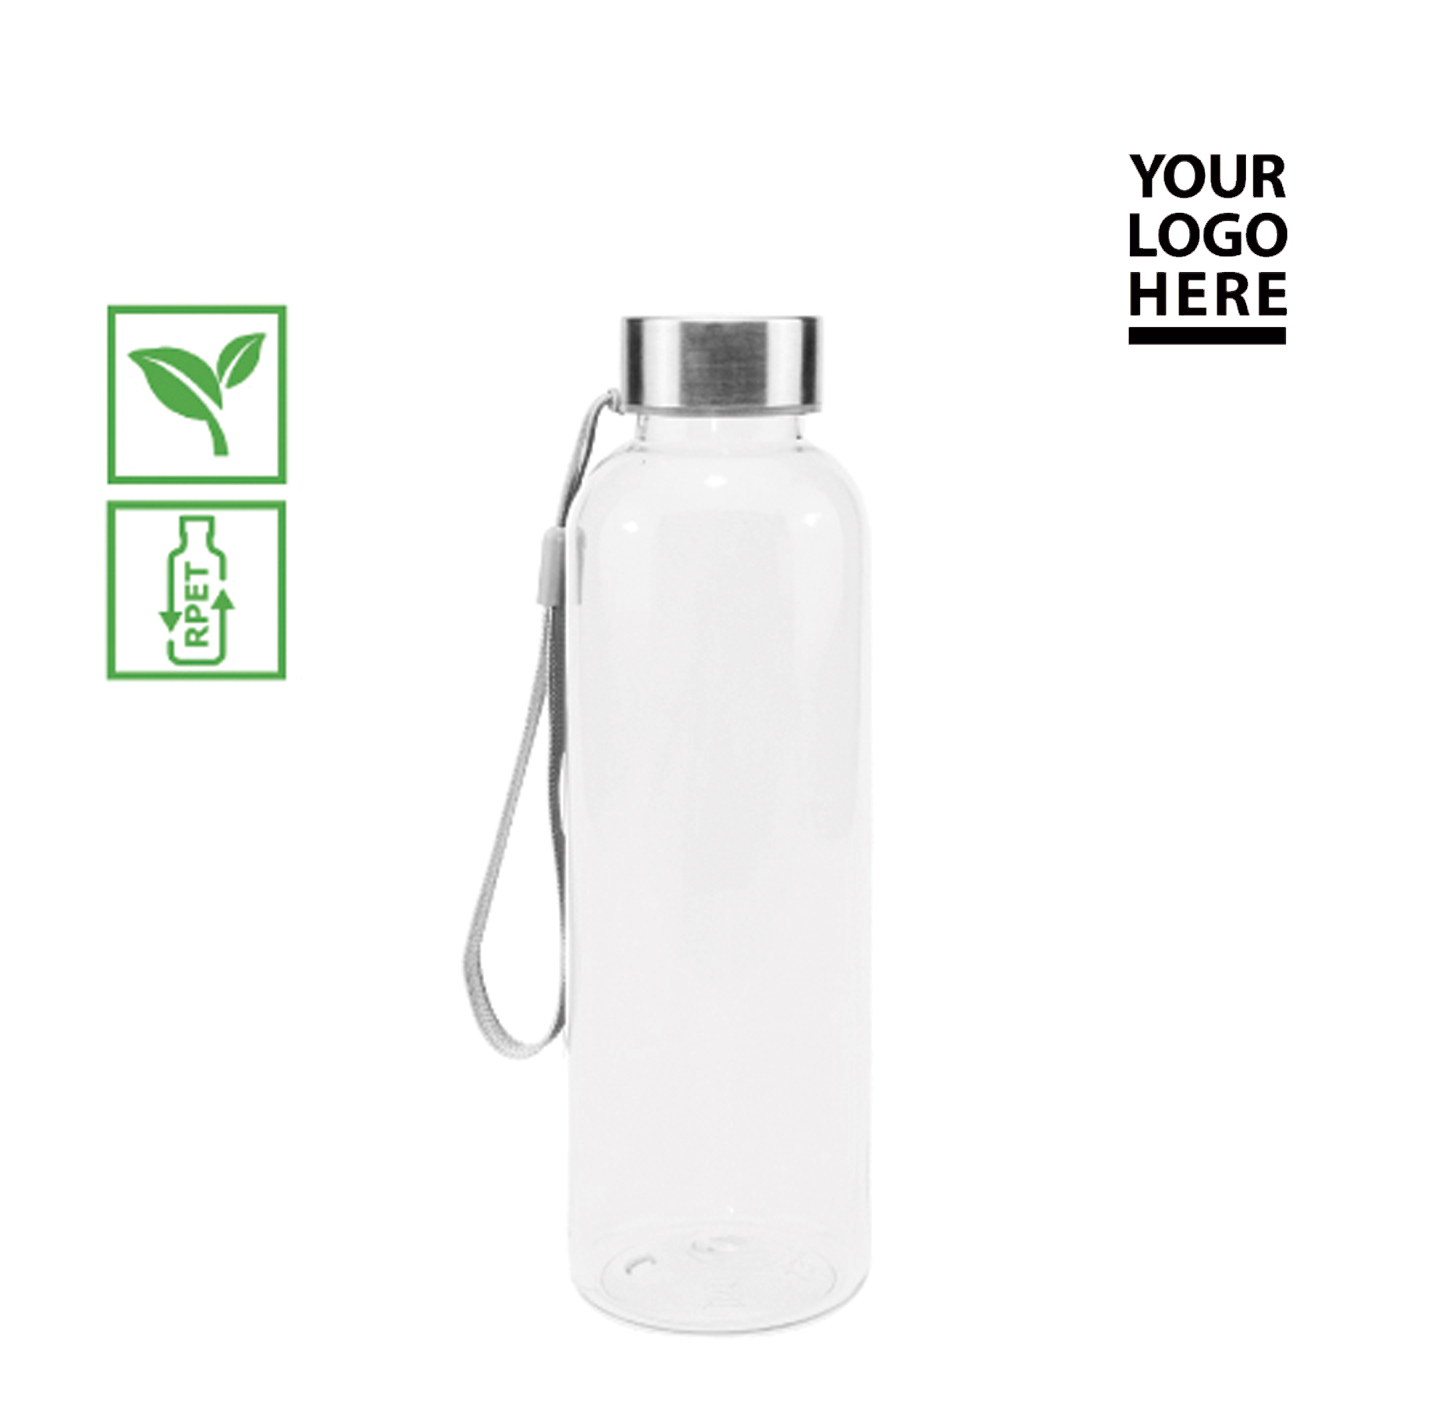 RPET Bottle with Side String Handle